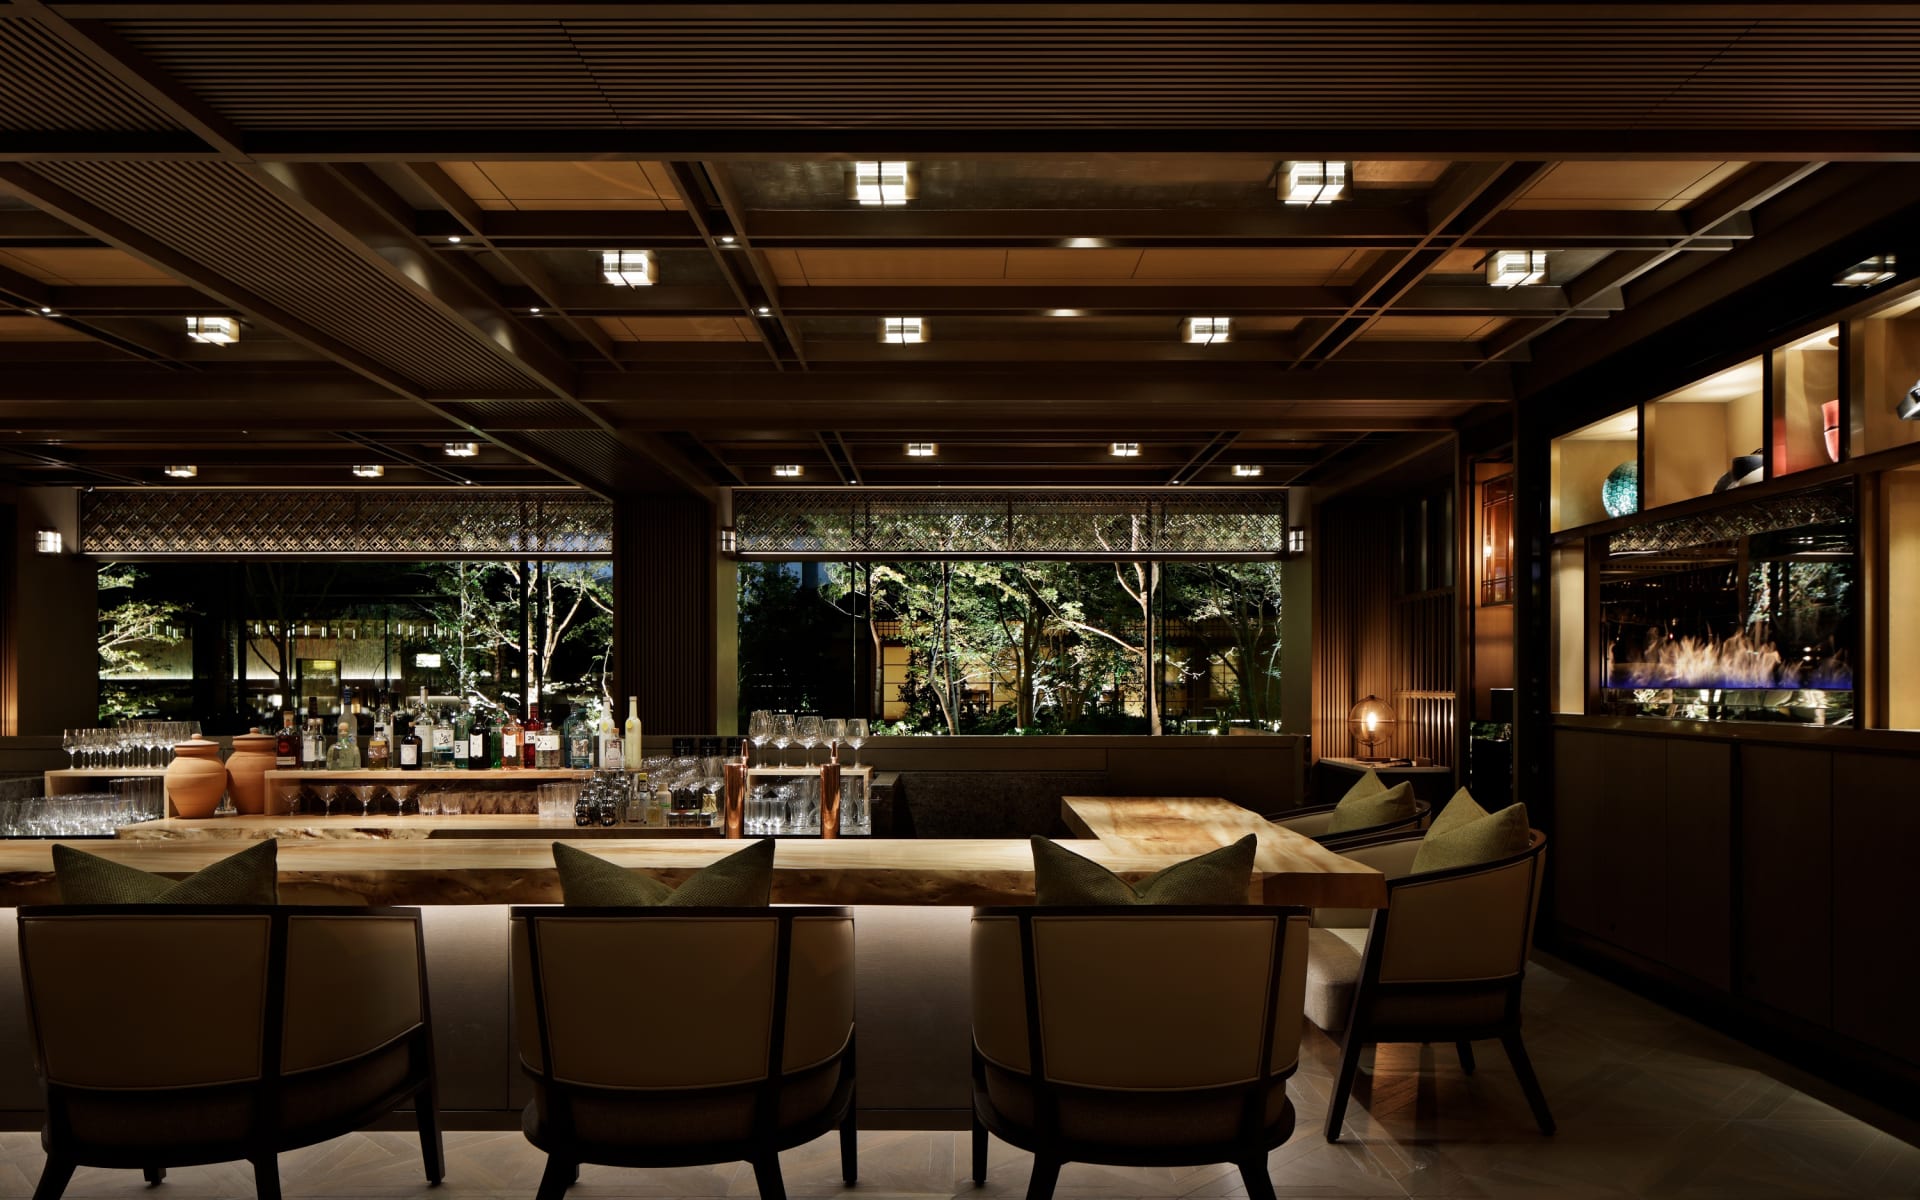 The bar and lounge at The Mitsui has low-lighting, long tables and views into the garden. 